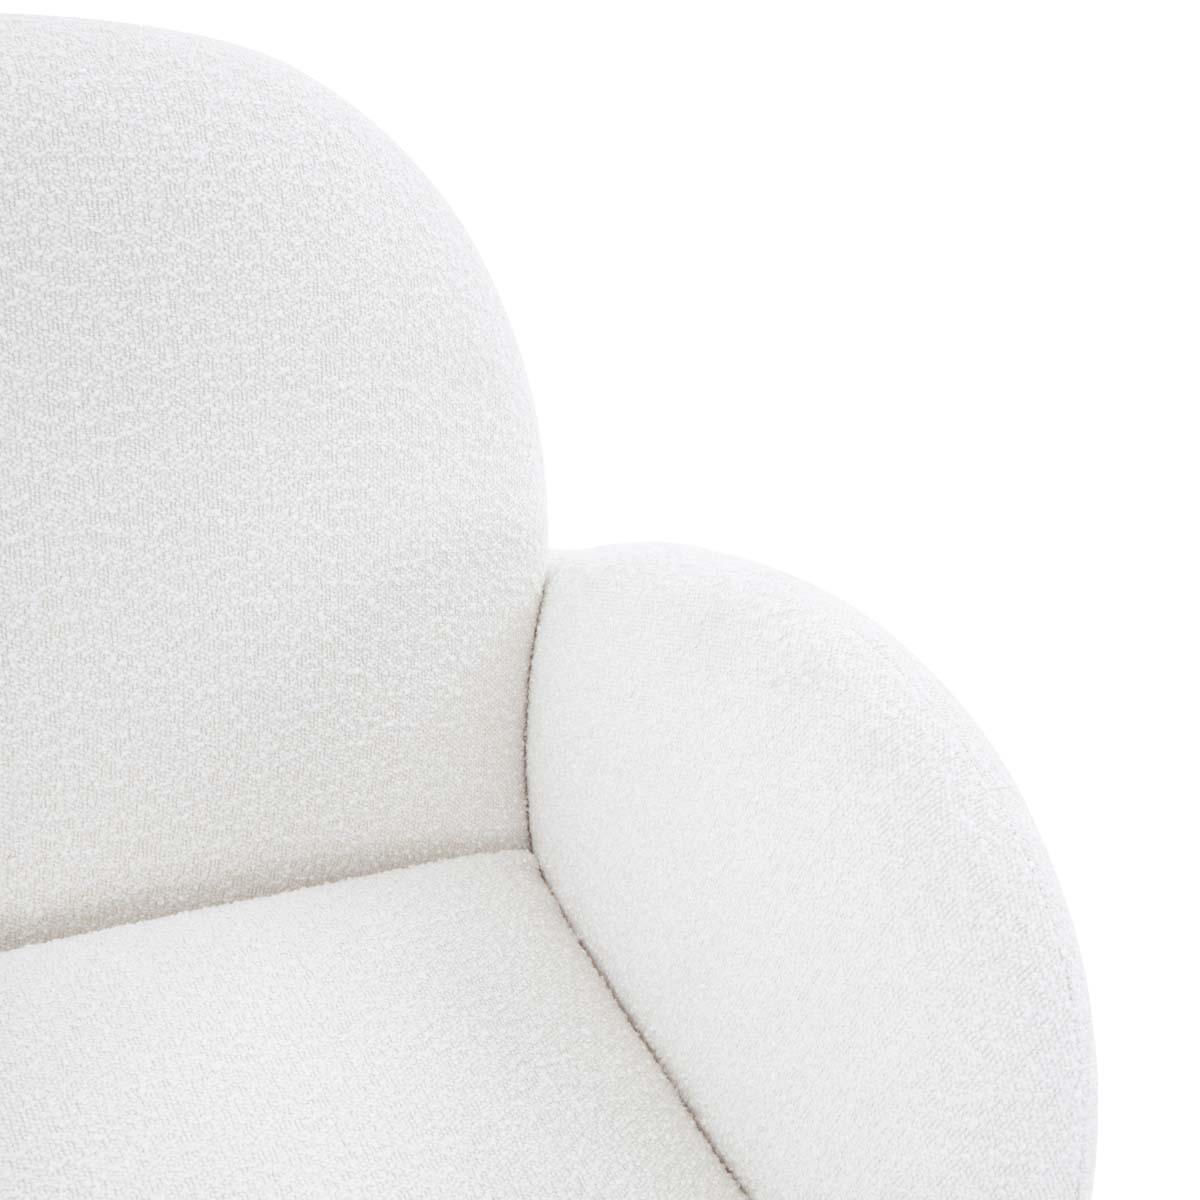 Safavieh Couture Crystalyn Boucle Accent Chair - Ivory / Black